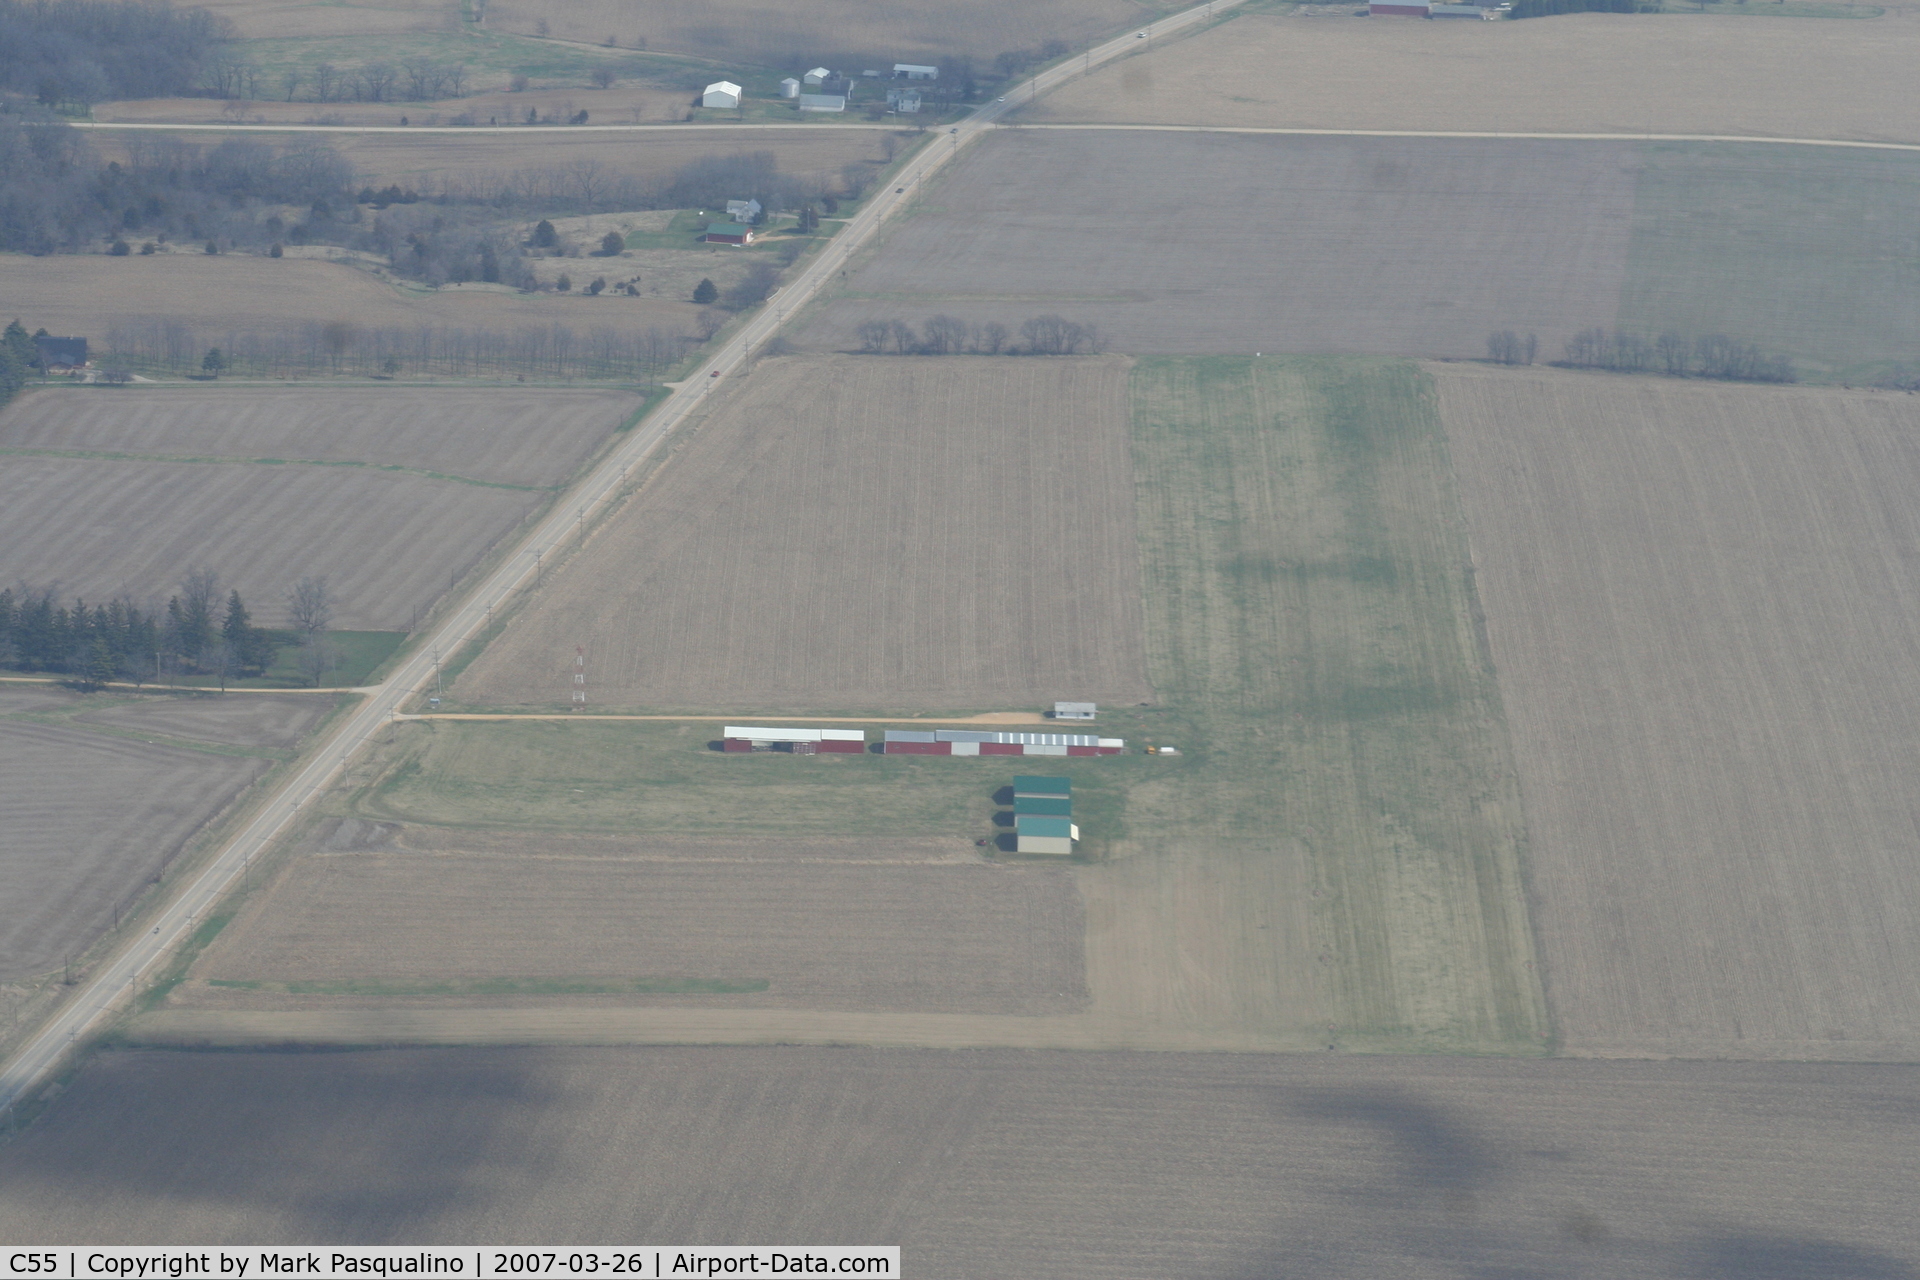 Ogle County Airport (C55) - Ogle County Airport